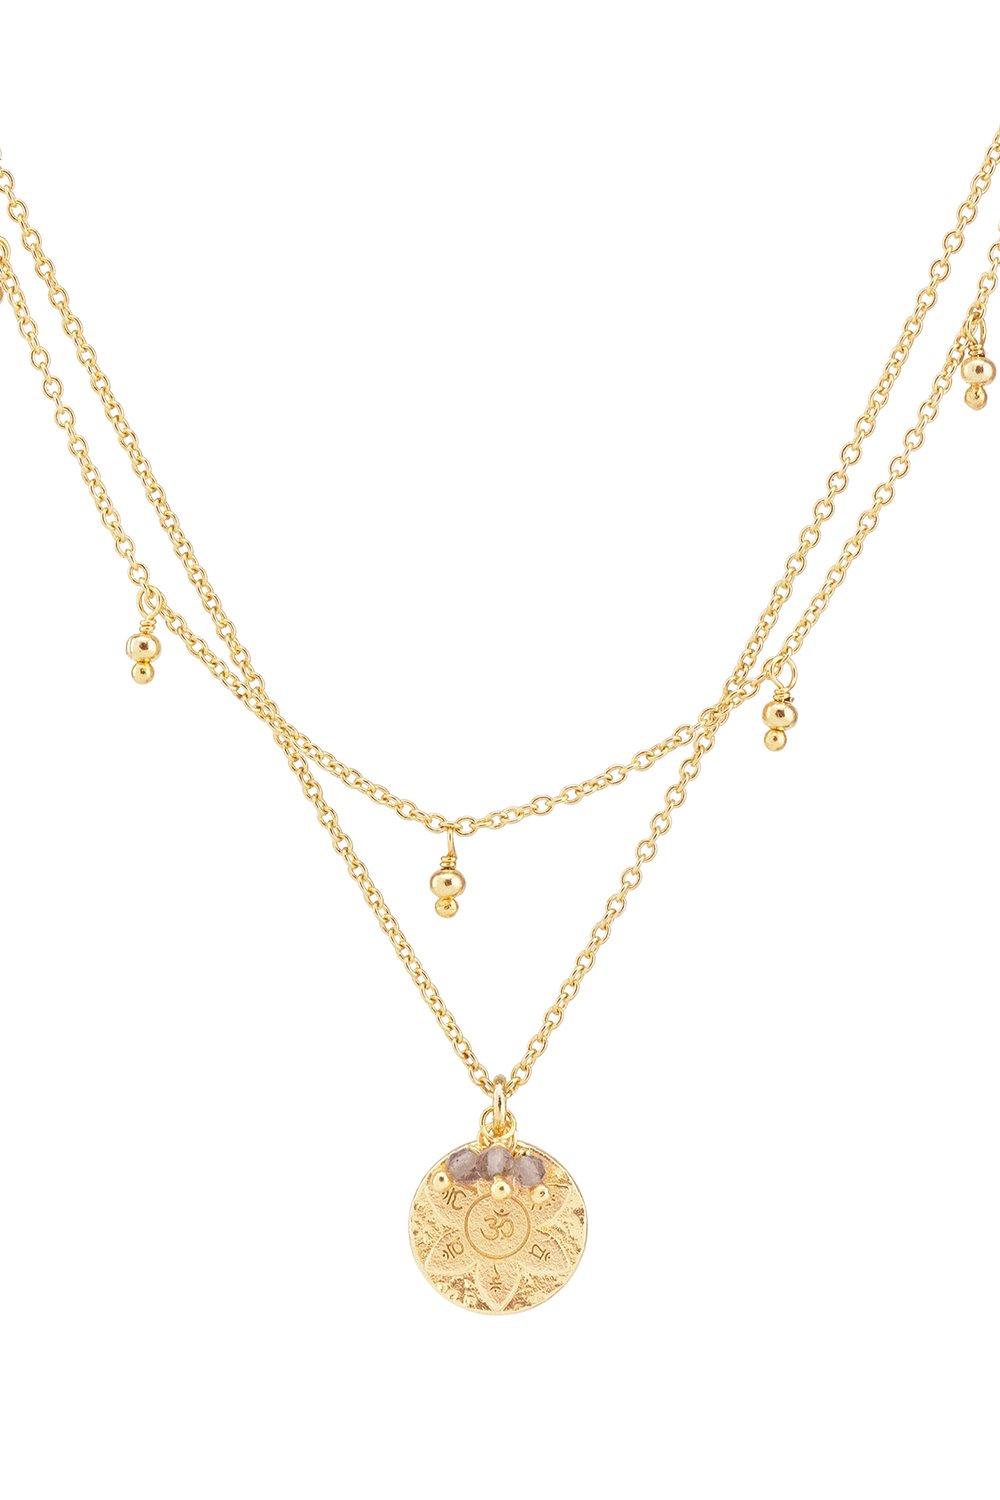 BY CHARLOTTE HARMONY NECKLACE GOLD